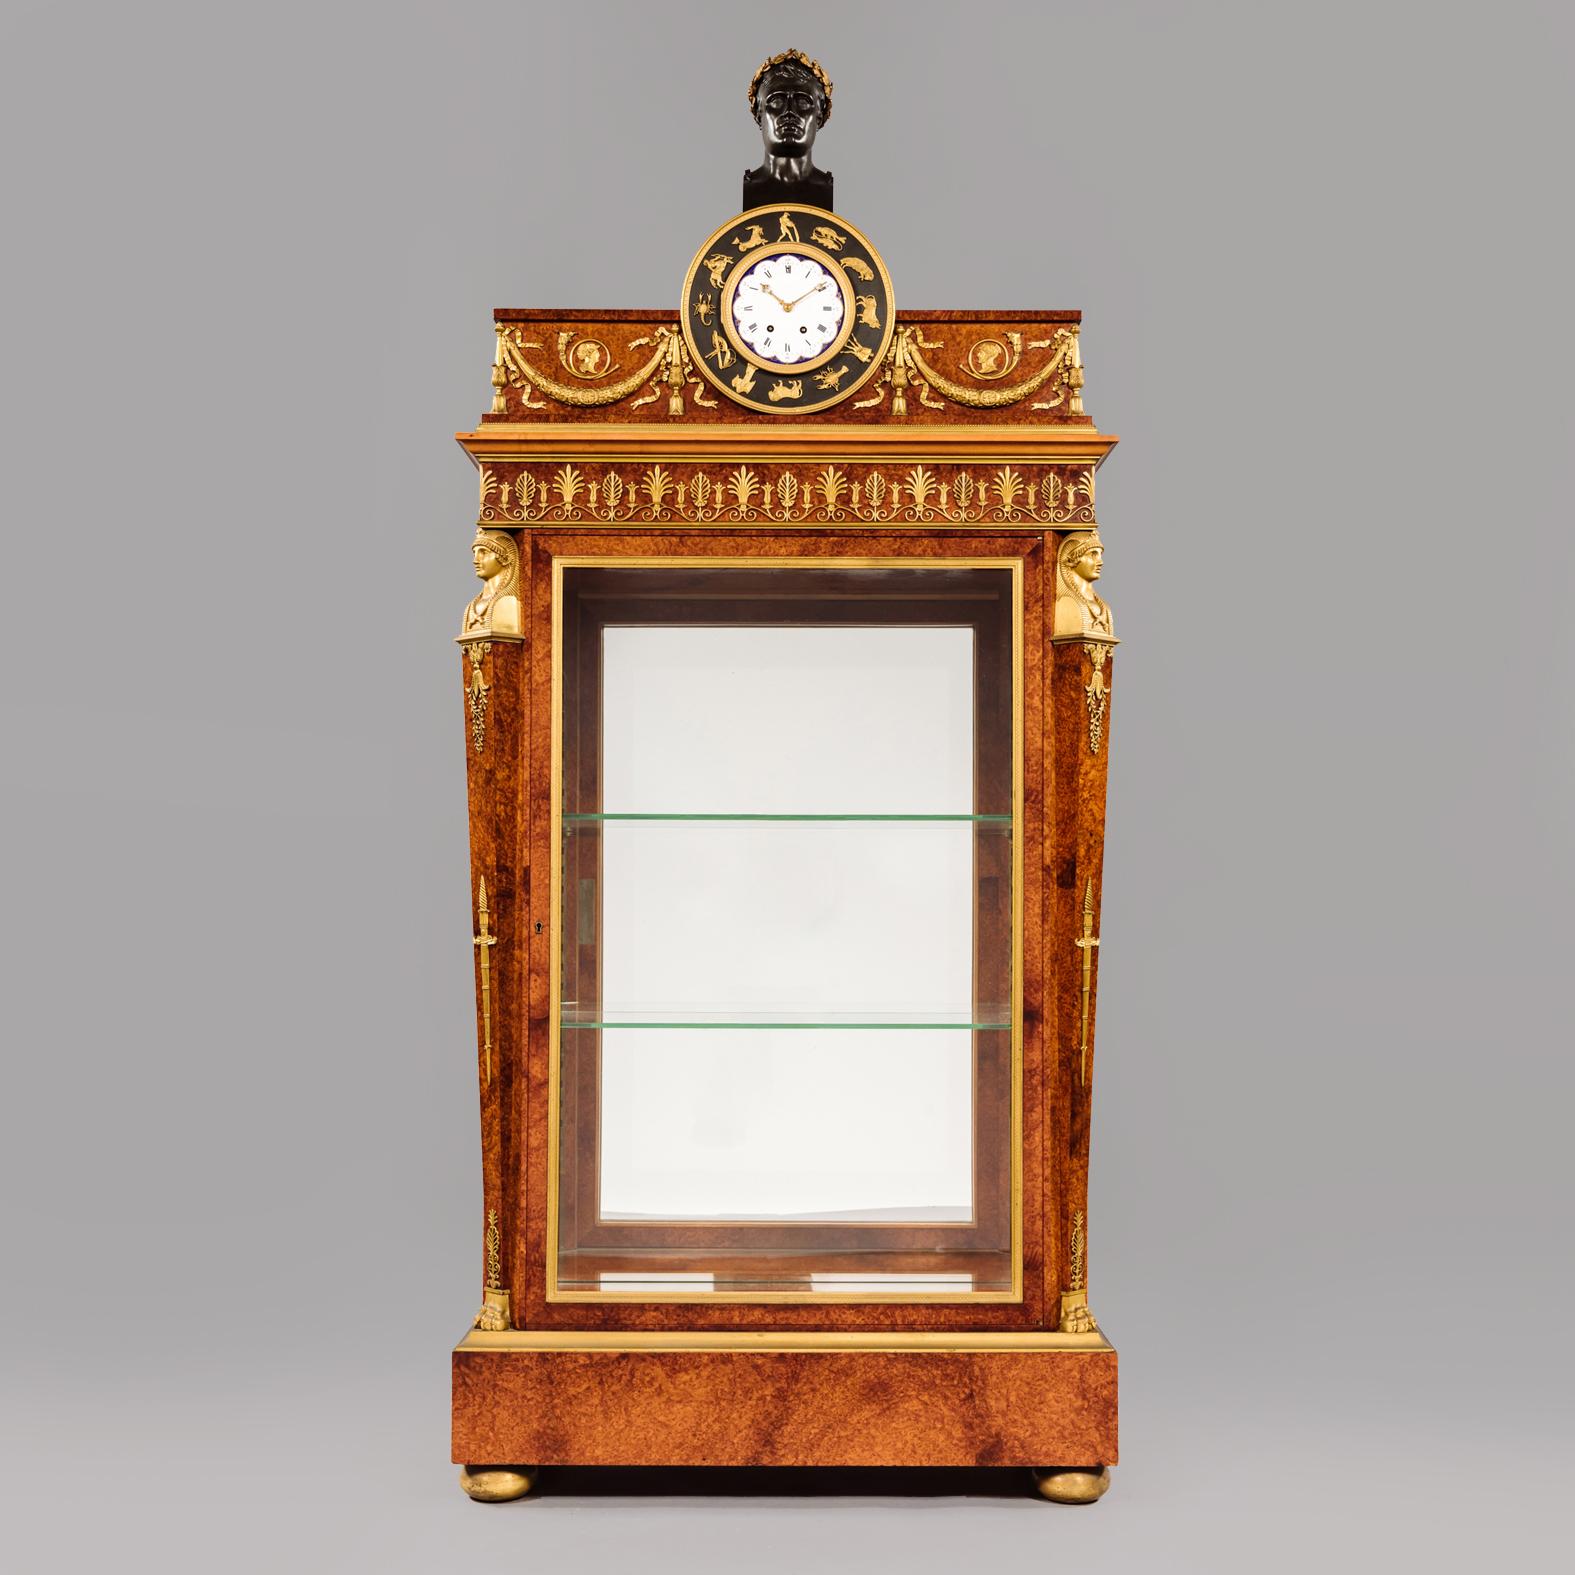 A very fine Amboyna wood and gilt-bronze empire style vitrine cabinet with a glazed front and sides. The cabinet is mounted all over with superb quality well chiselled gilt-bronze mounts and surmounted by a clock with an enamel dial face surrounded